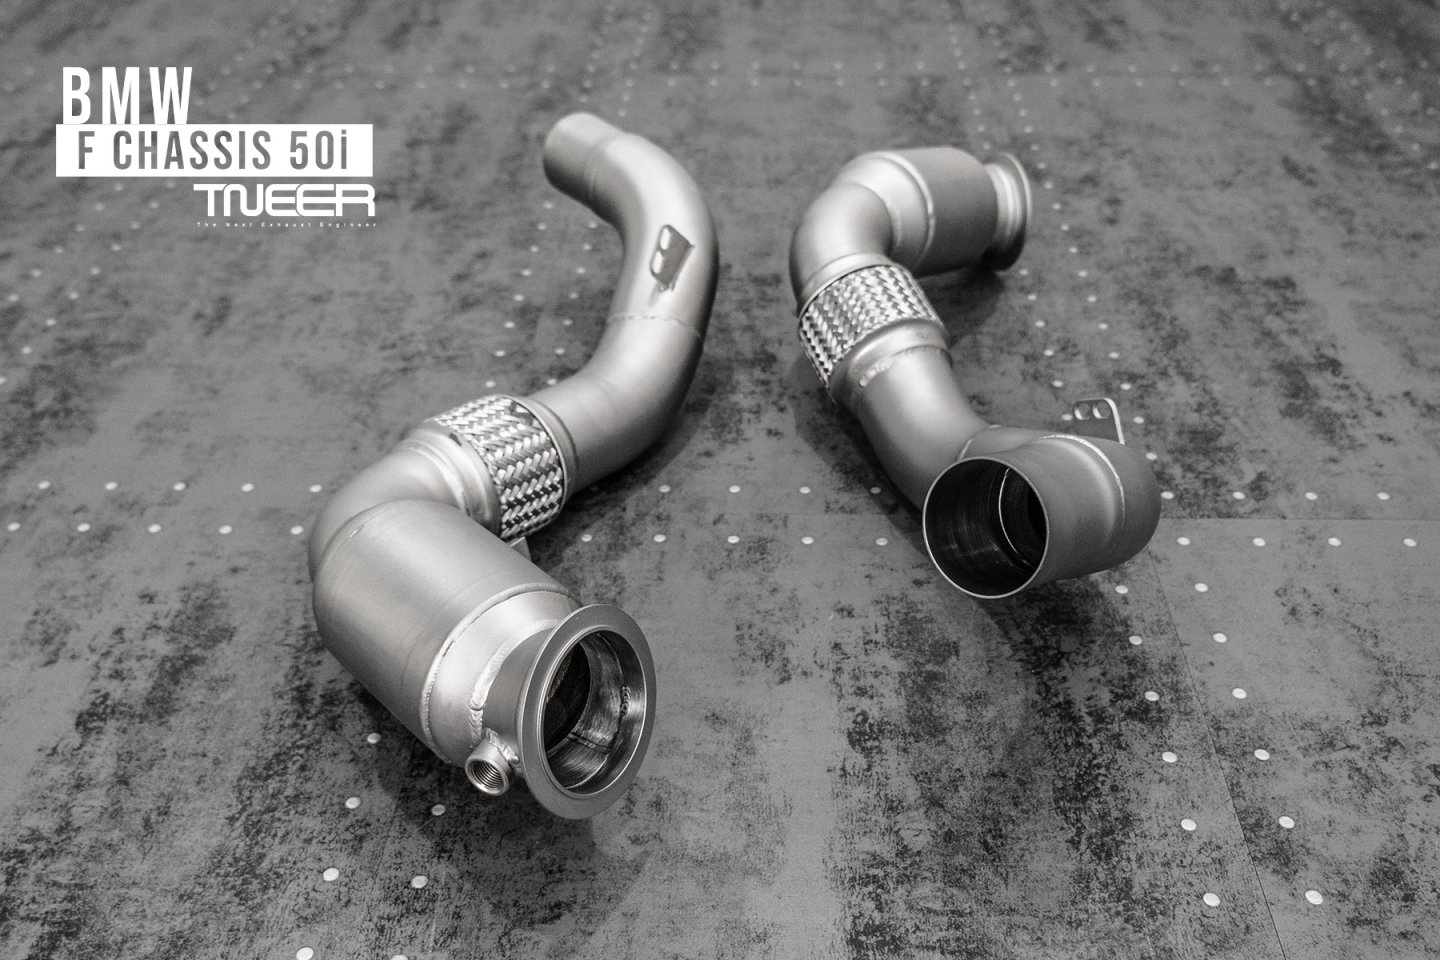 BMW F06 (M6 Gran Coupe) TNEER Downpipes